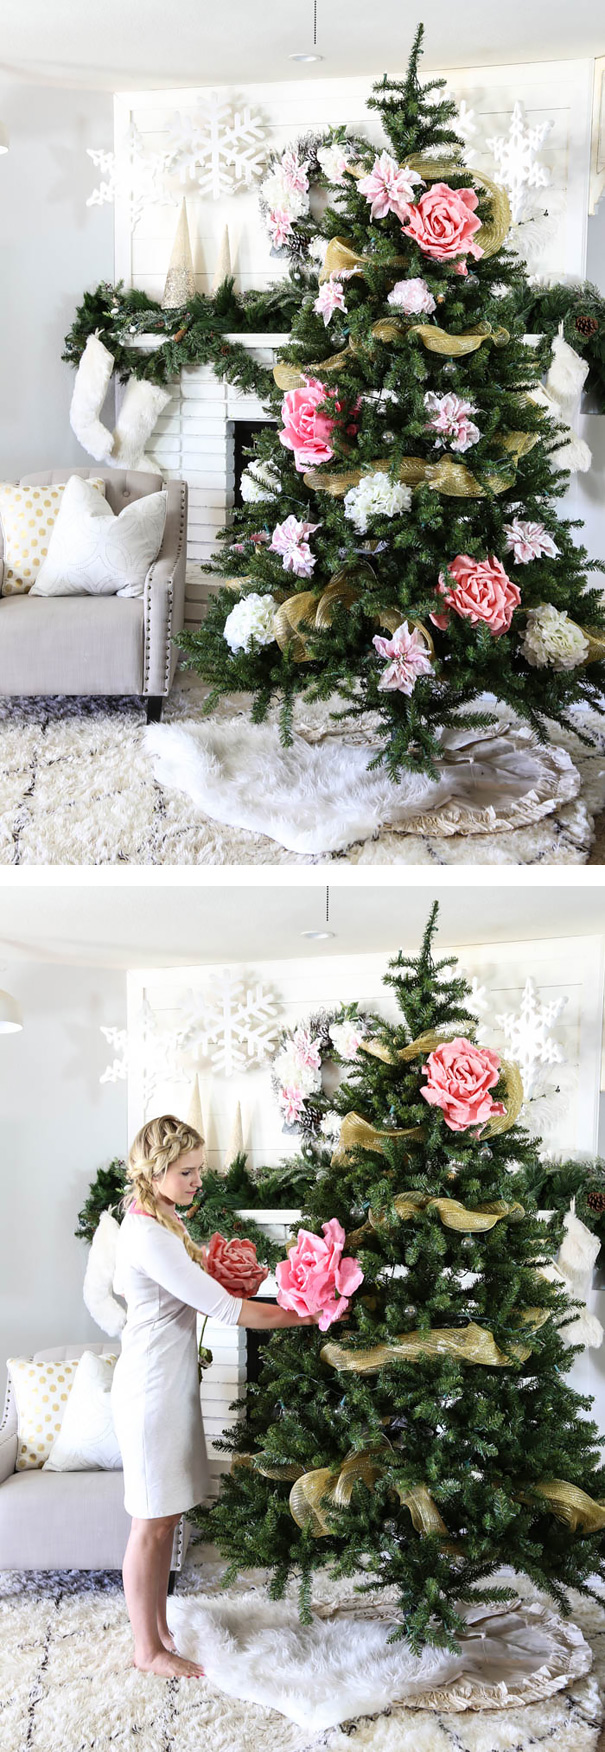 People Are Decorating Their Christmas Trees With Flowers And The Results Are6